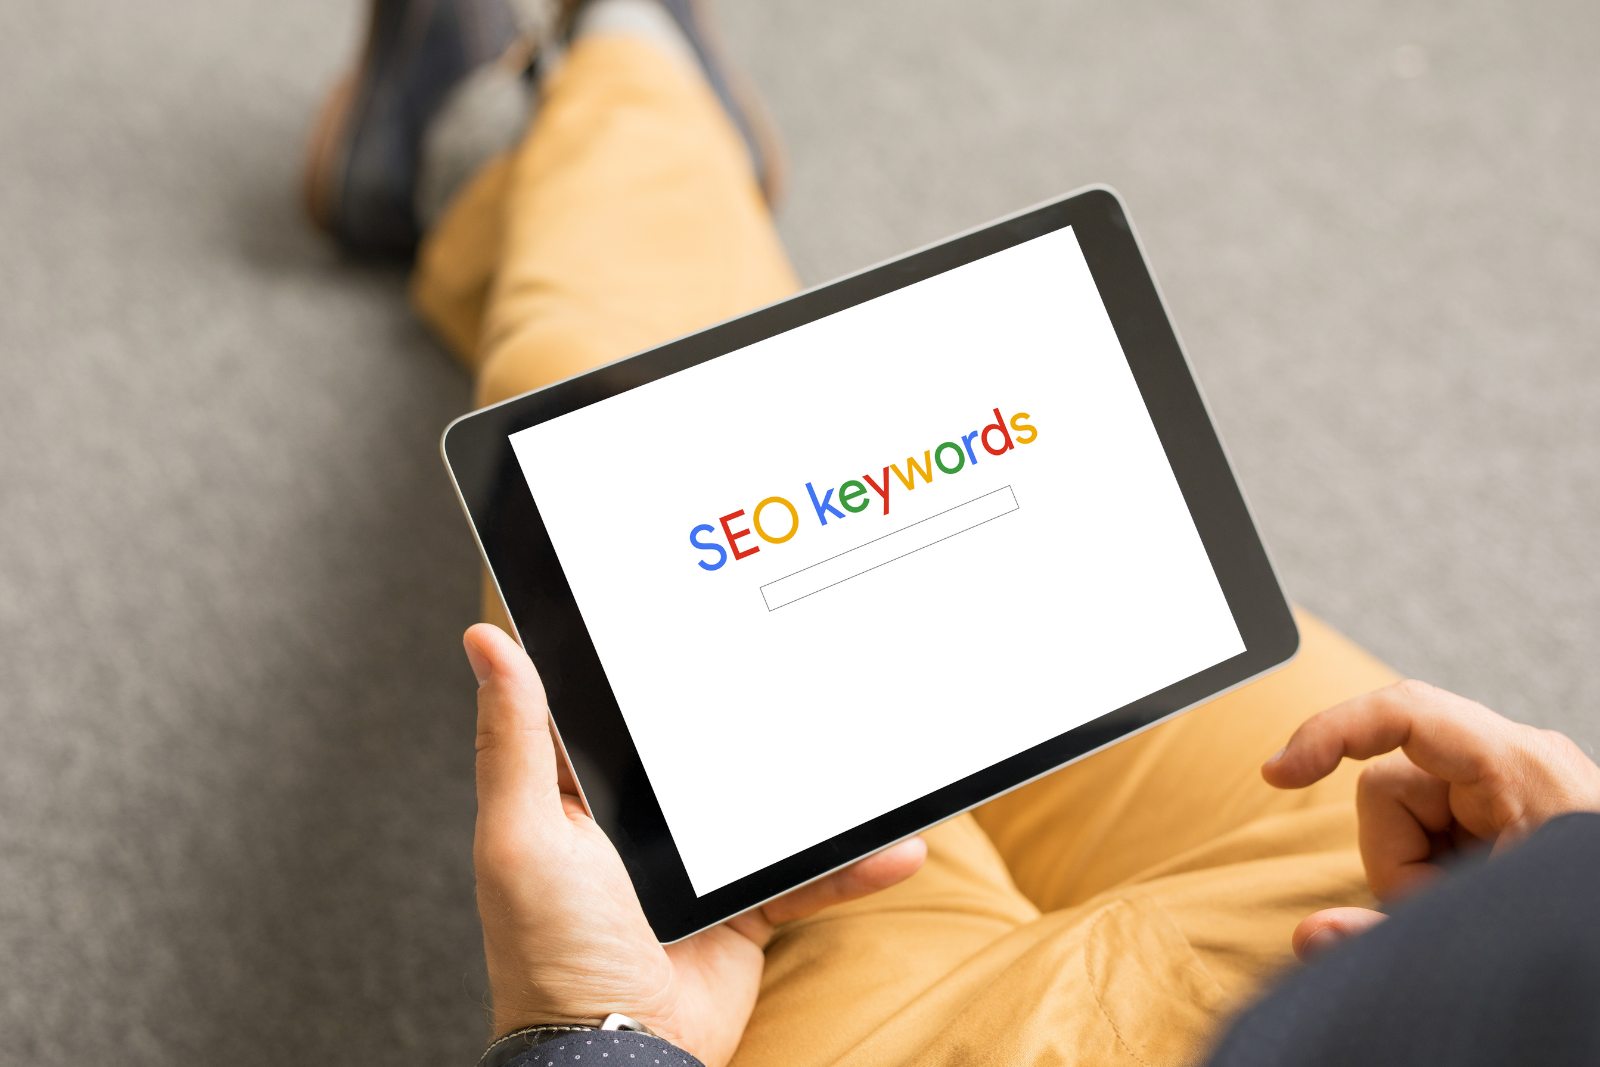 Man holding a tablet that says "SEO Keywords" in the same font as Google's logo